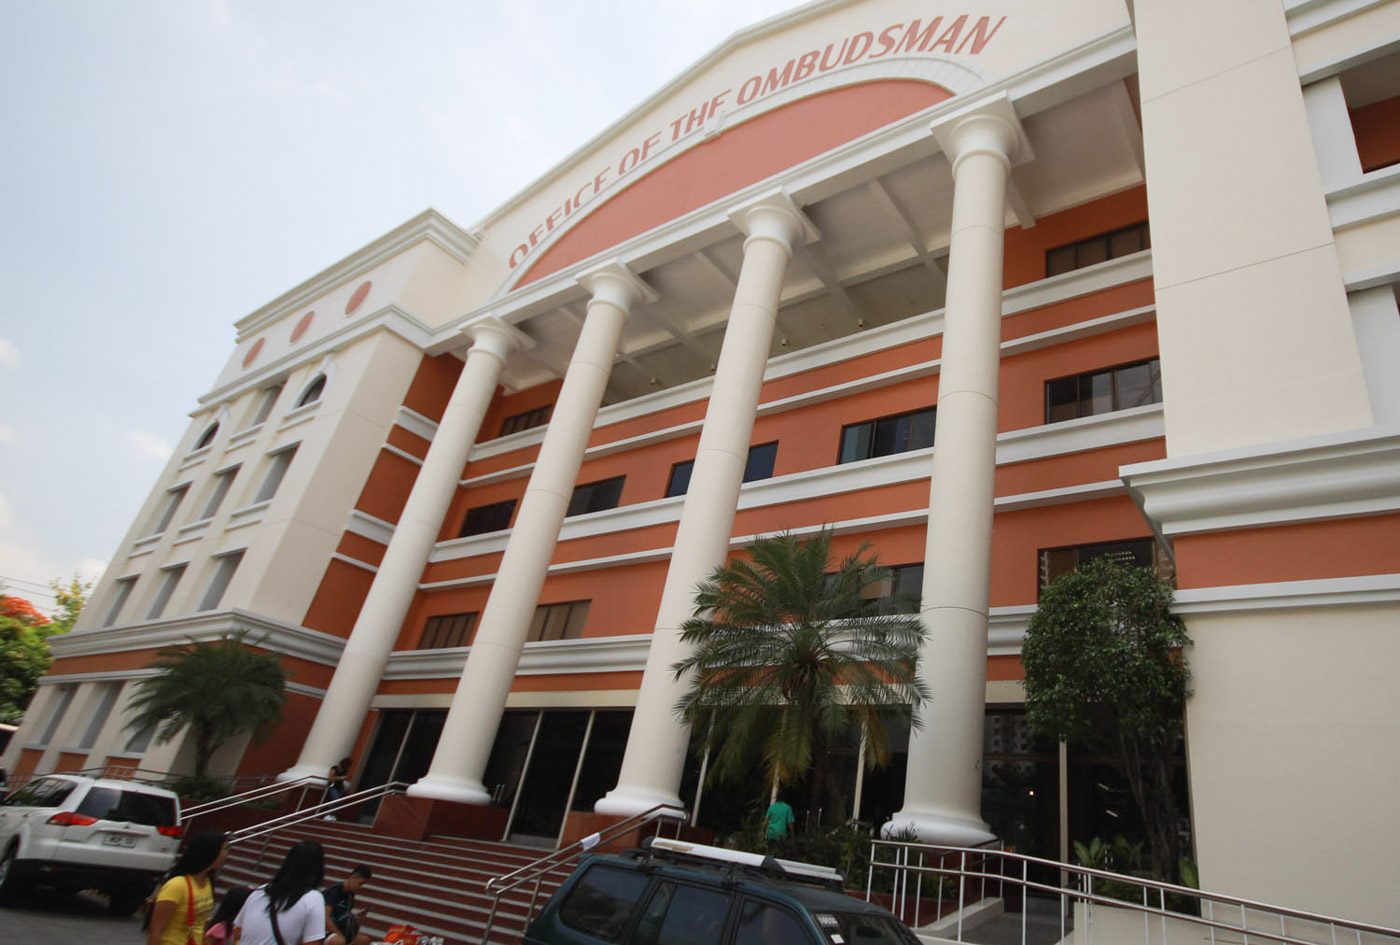 Bedan lawyer, Davao judge also apply for Ombudsman post